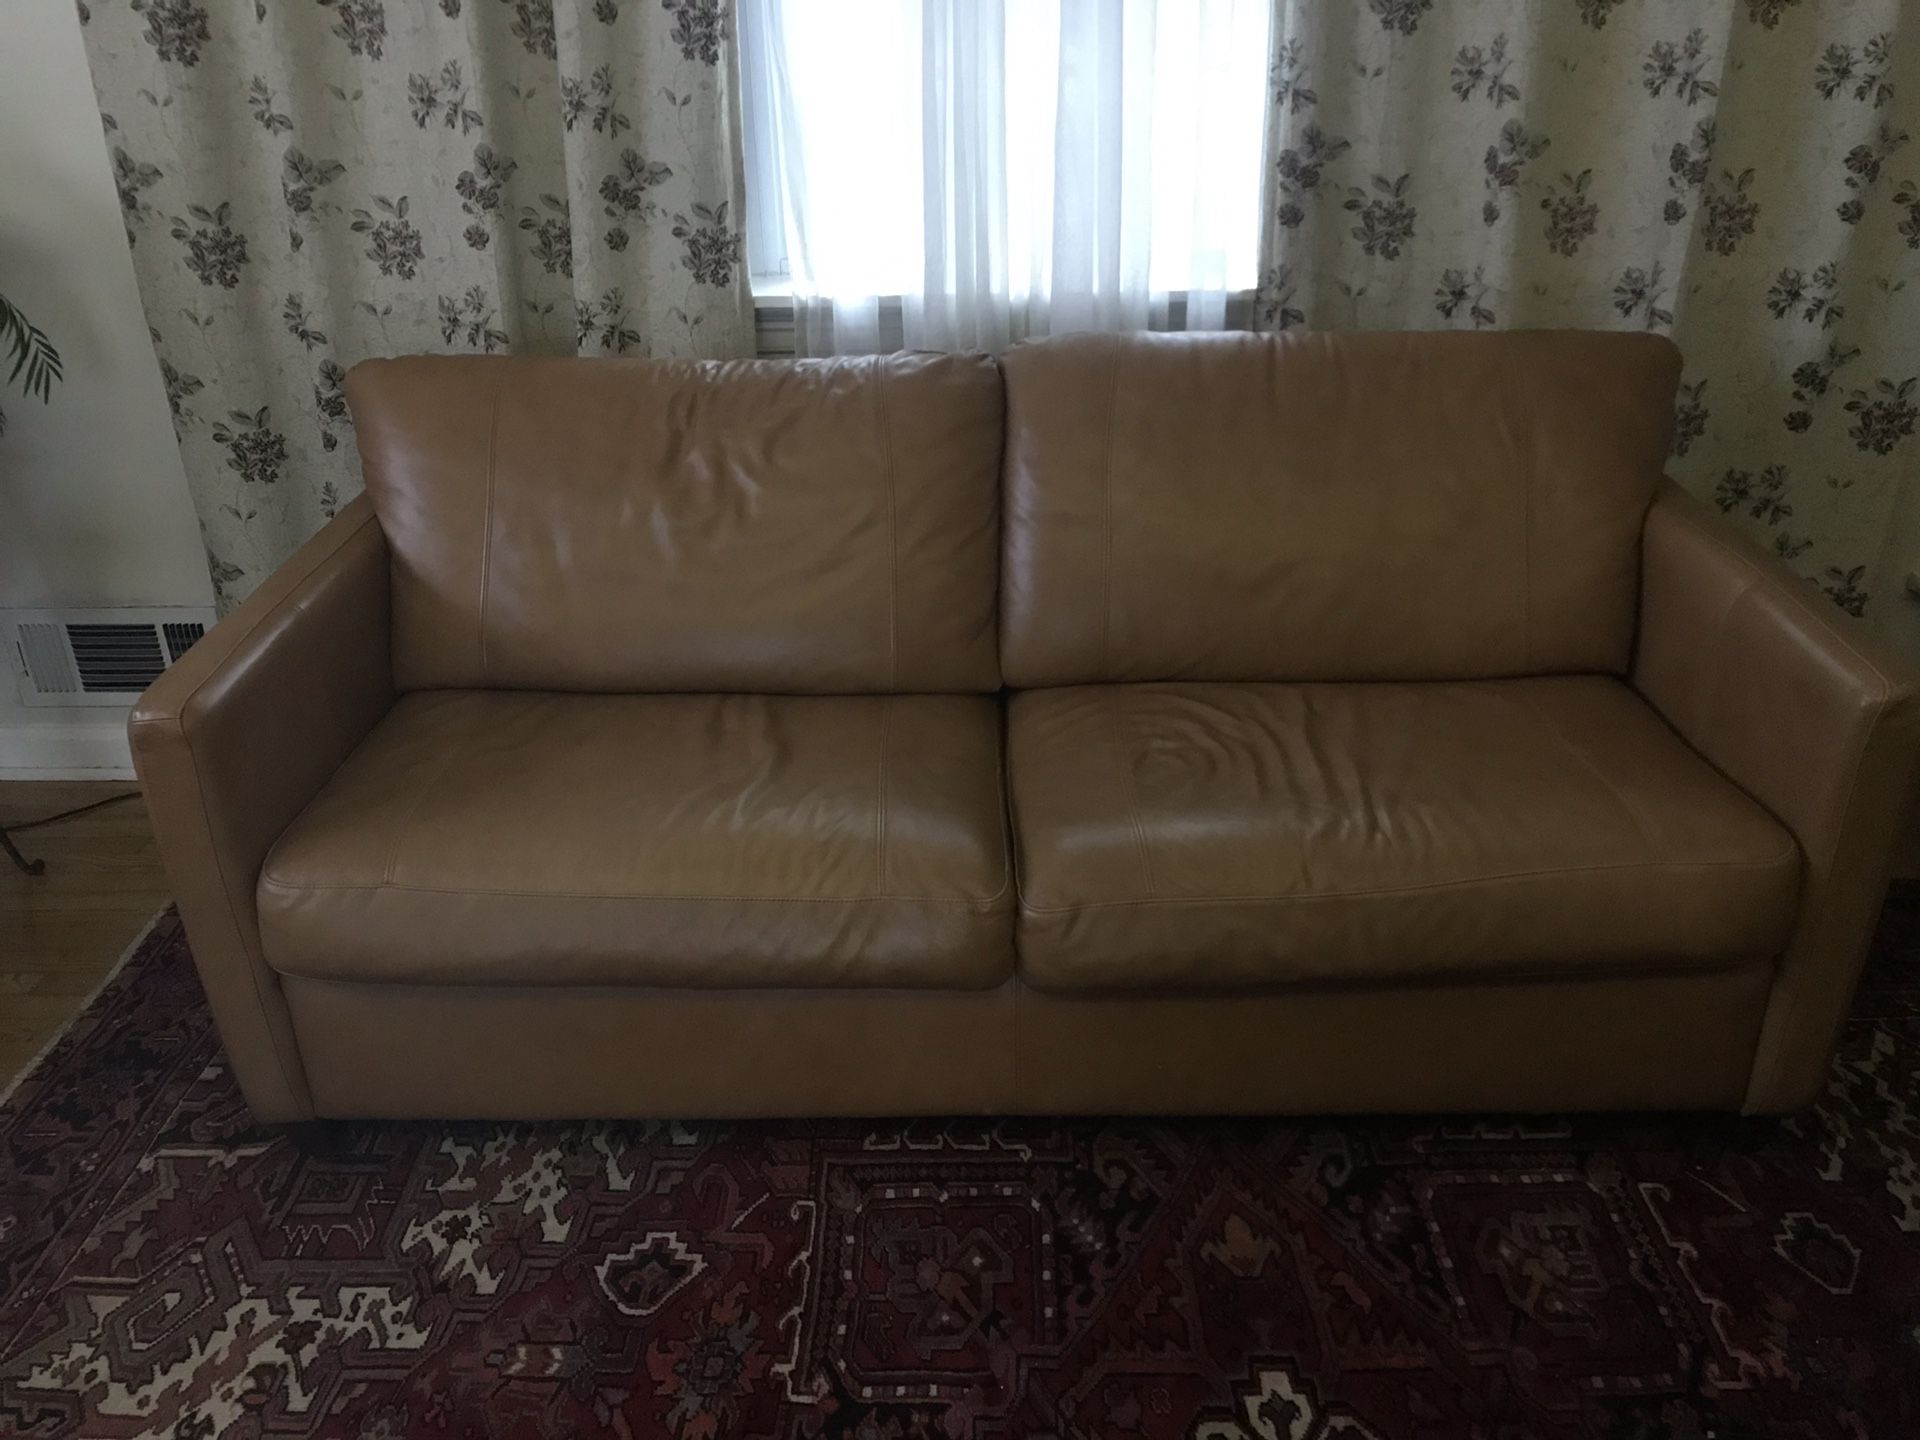 Real leather sofa bed.